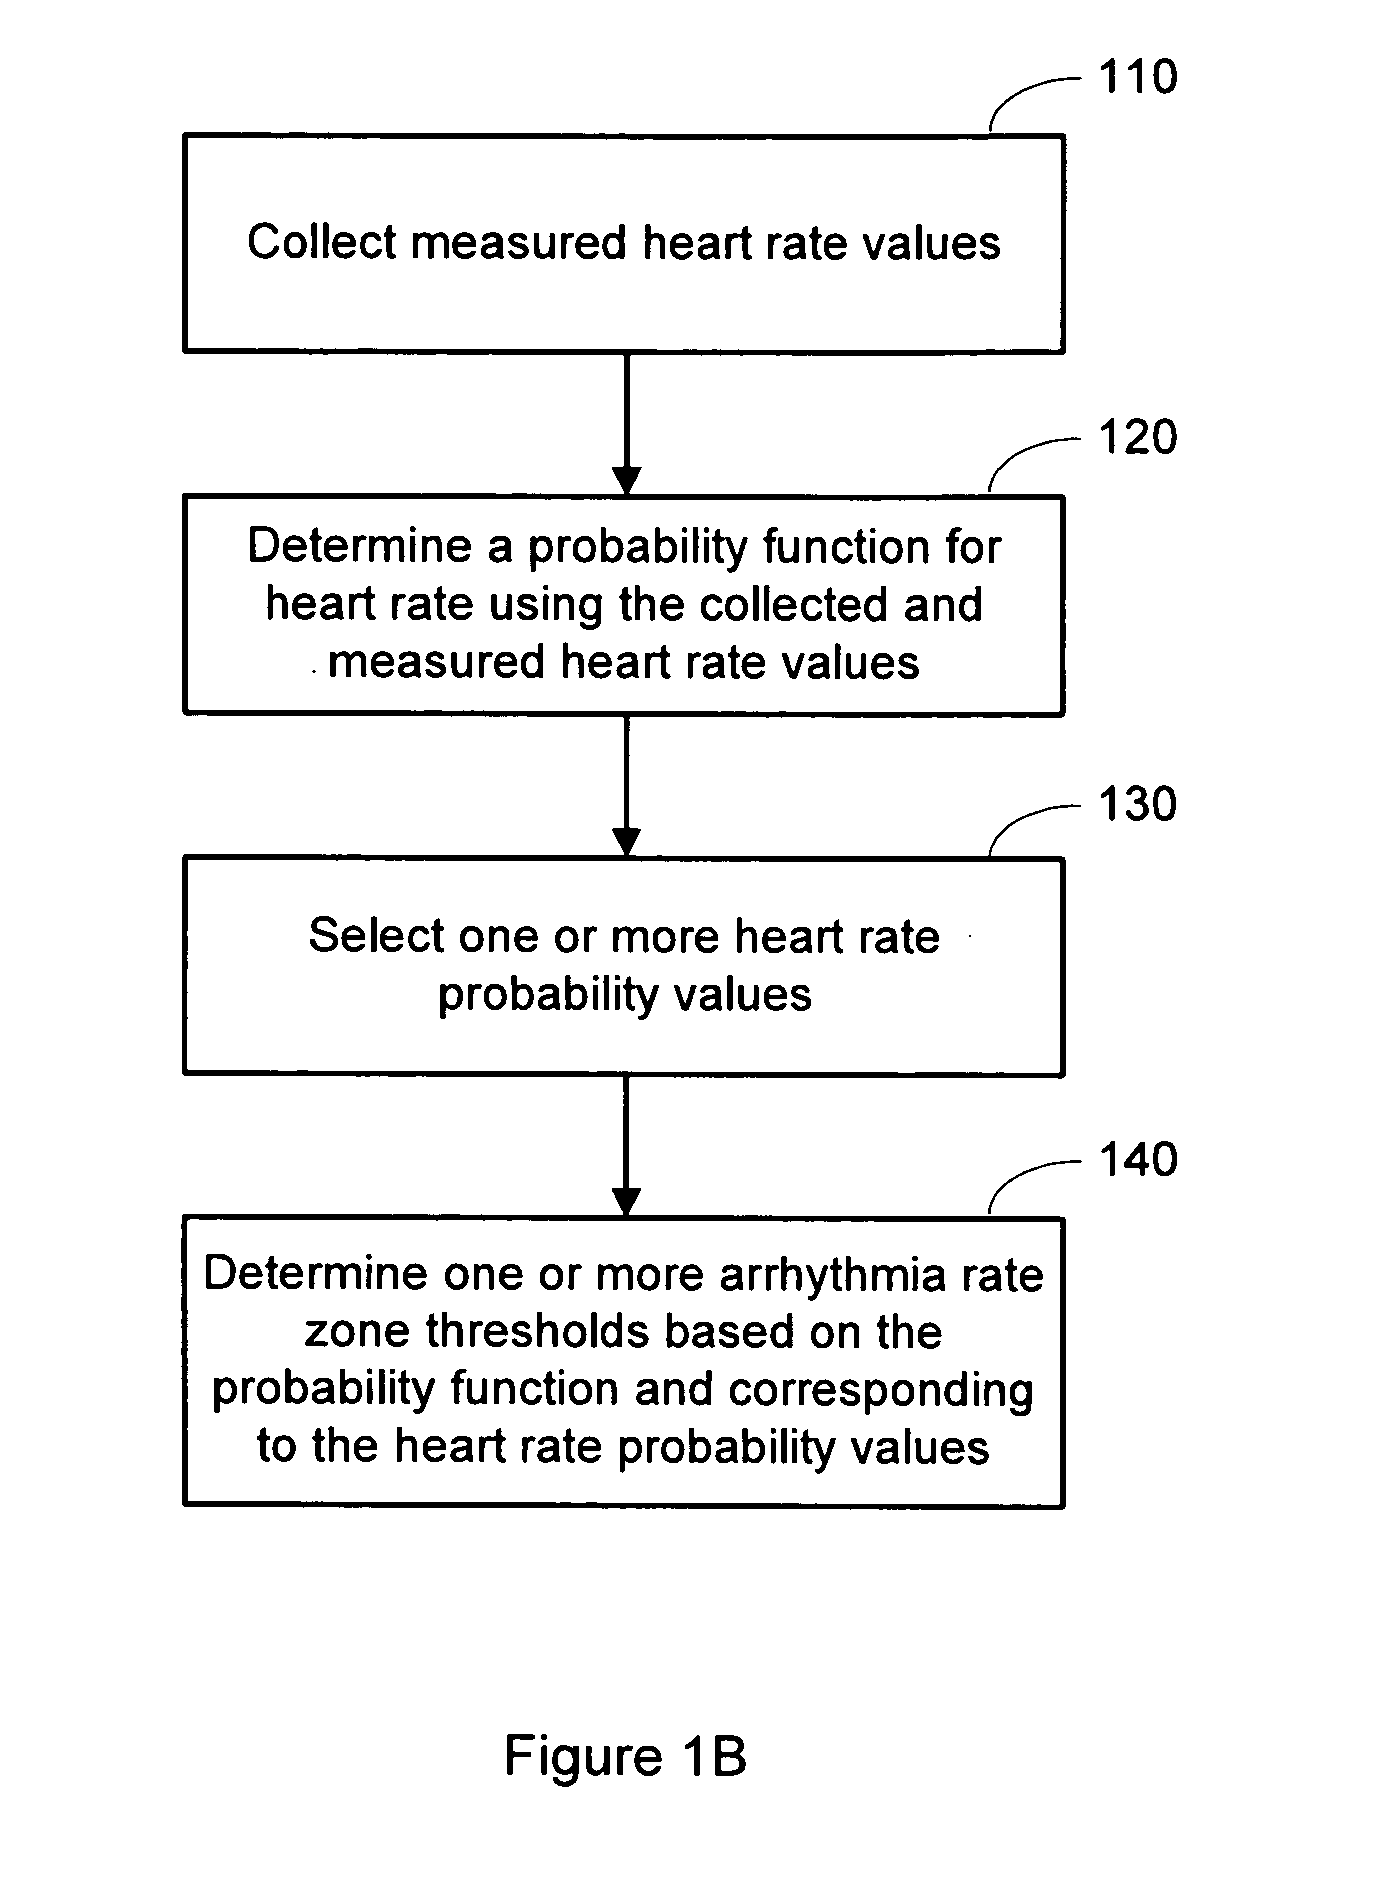 Methods and devices for determination of arrhythmia rate zone thresholds